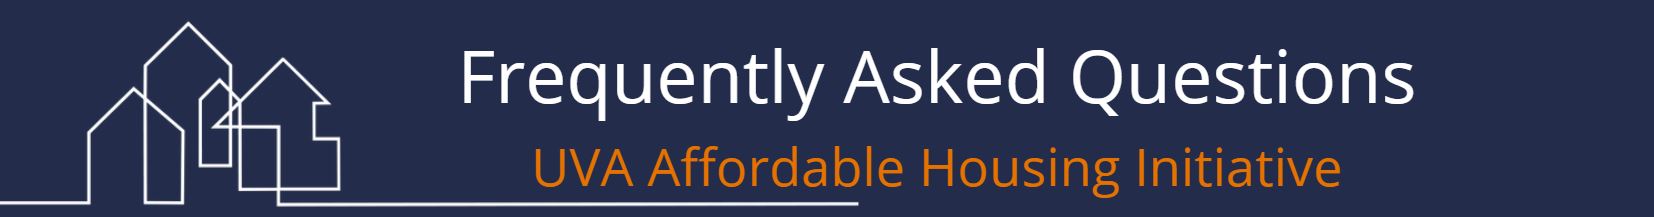 Frequently Asked Questions, UVA Affordable Housing Initiative